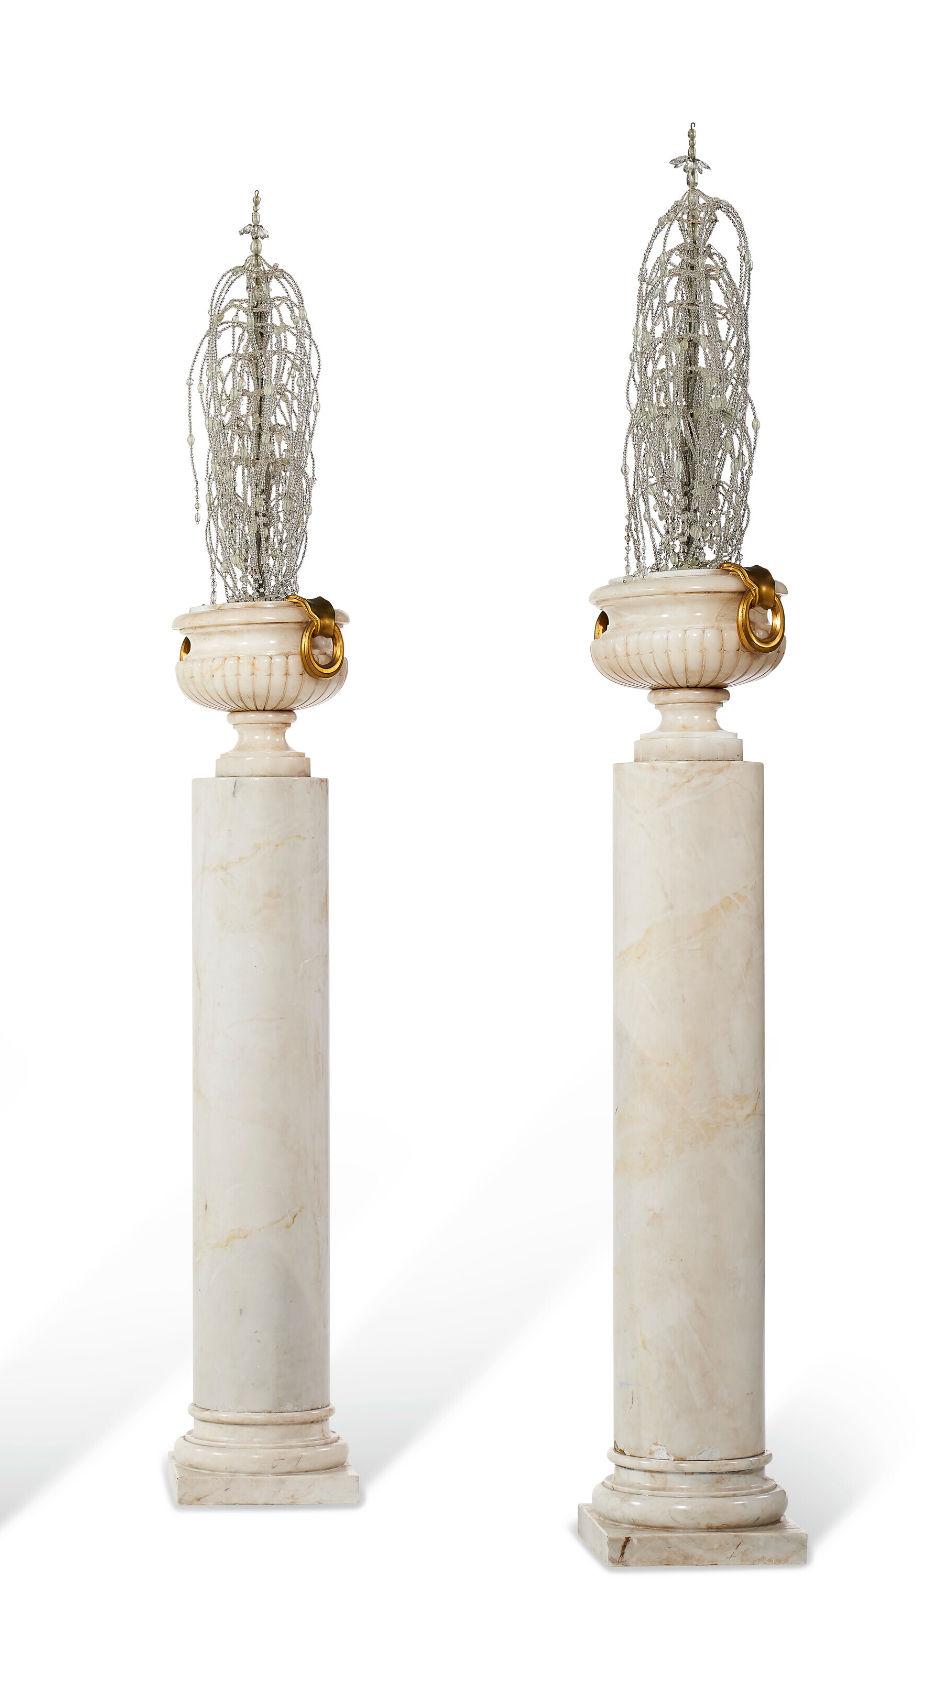 Neoclassical Set of Four Alabaster Urns with Beaded Glass Ornaments on Pedestals For Sale